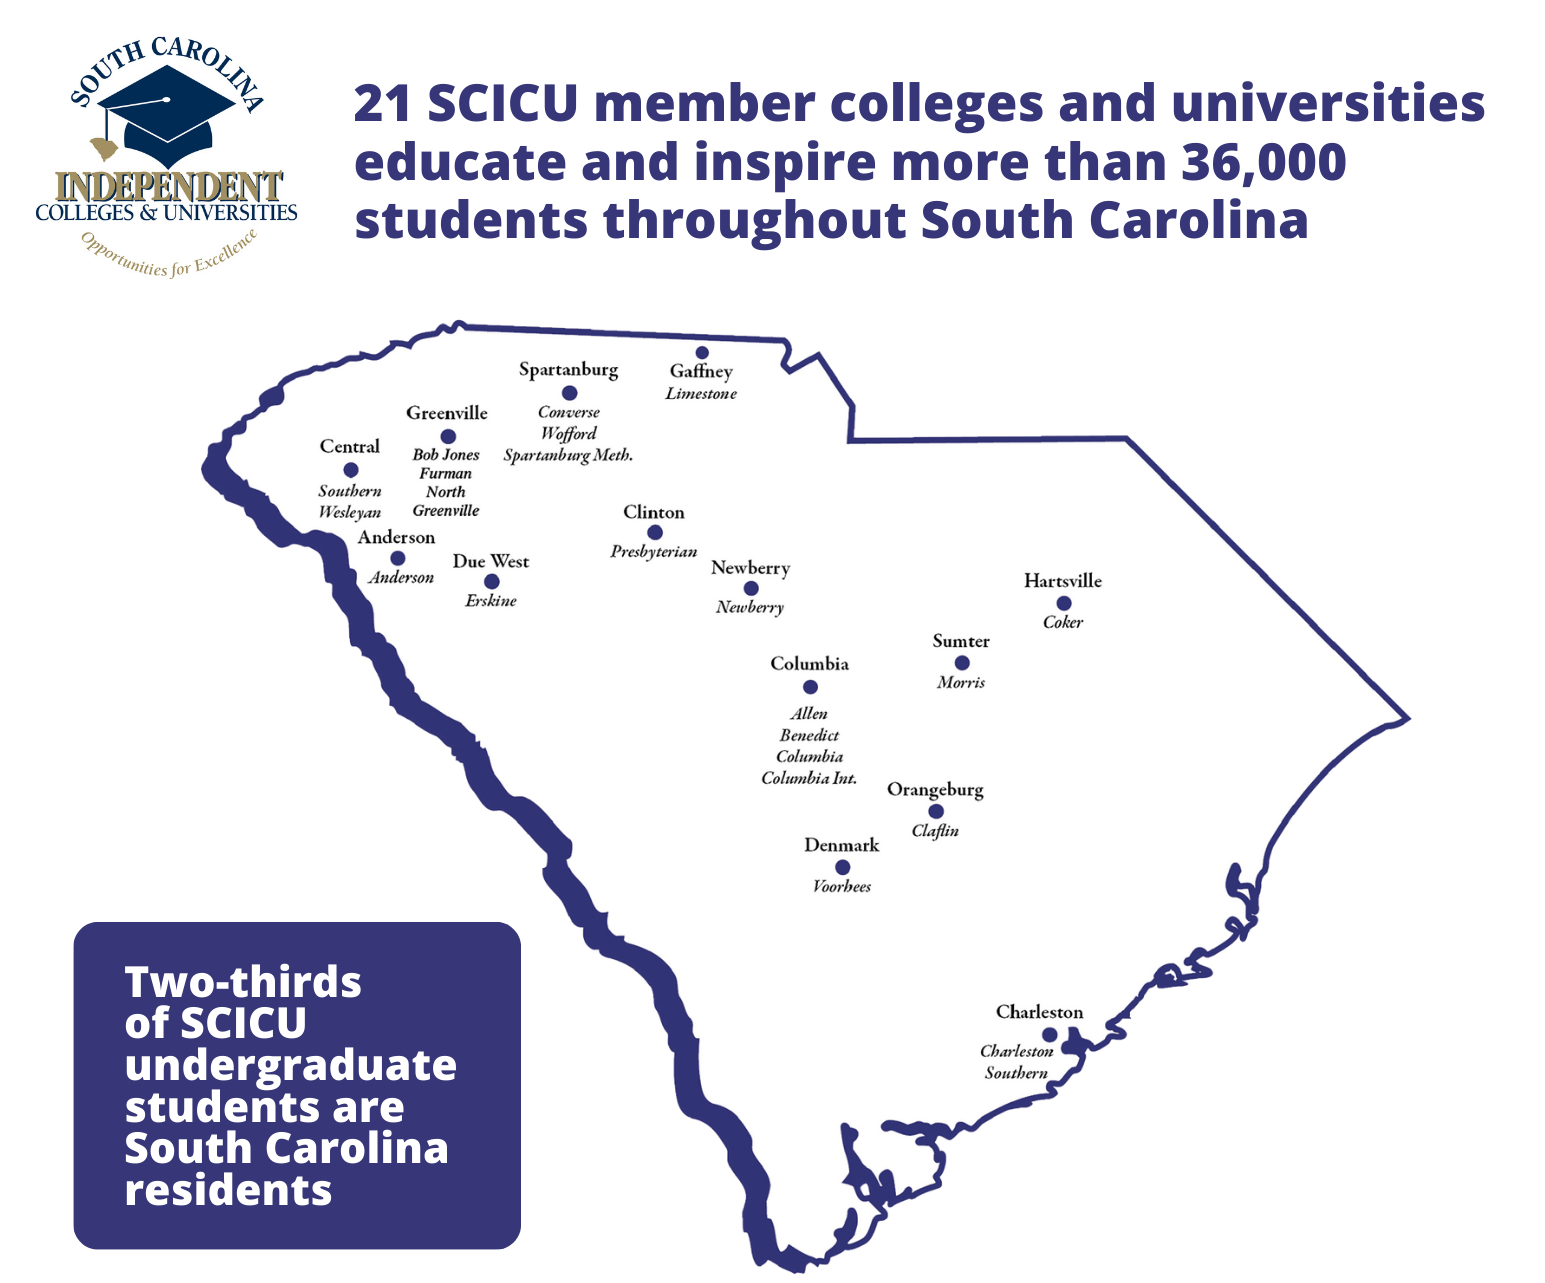 SCICU's 21 member colleges and universities educate and inspire more than 36,000 students throughout South Carolina